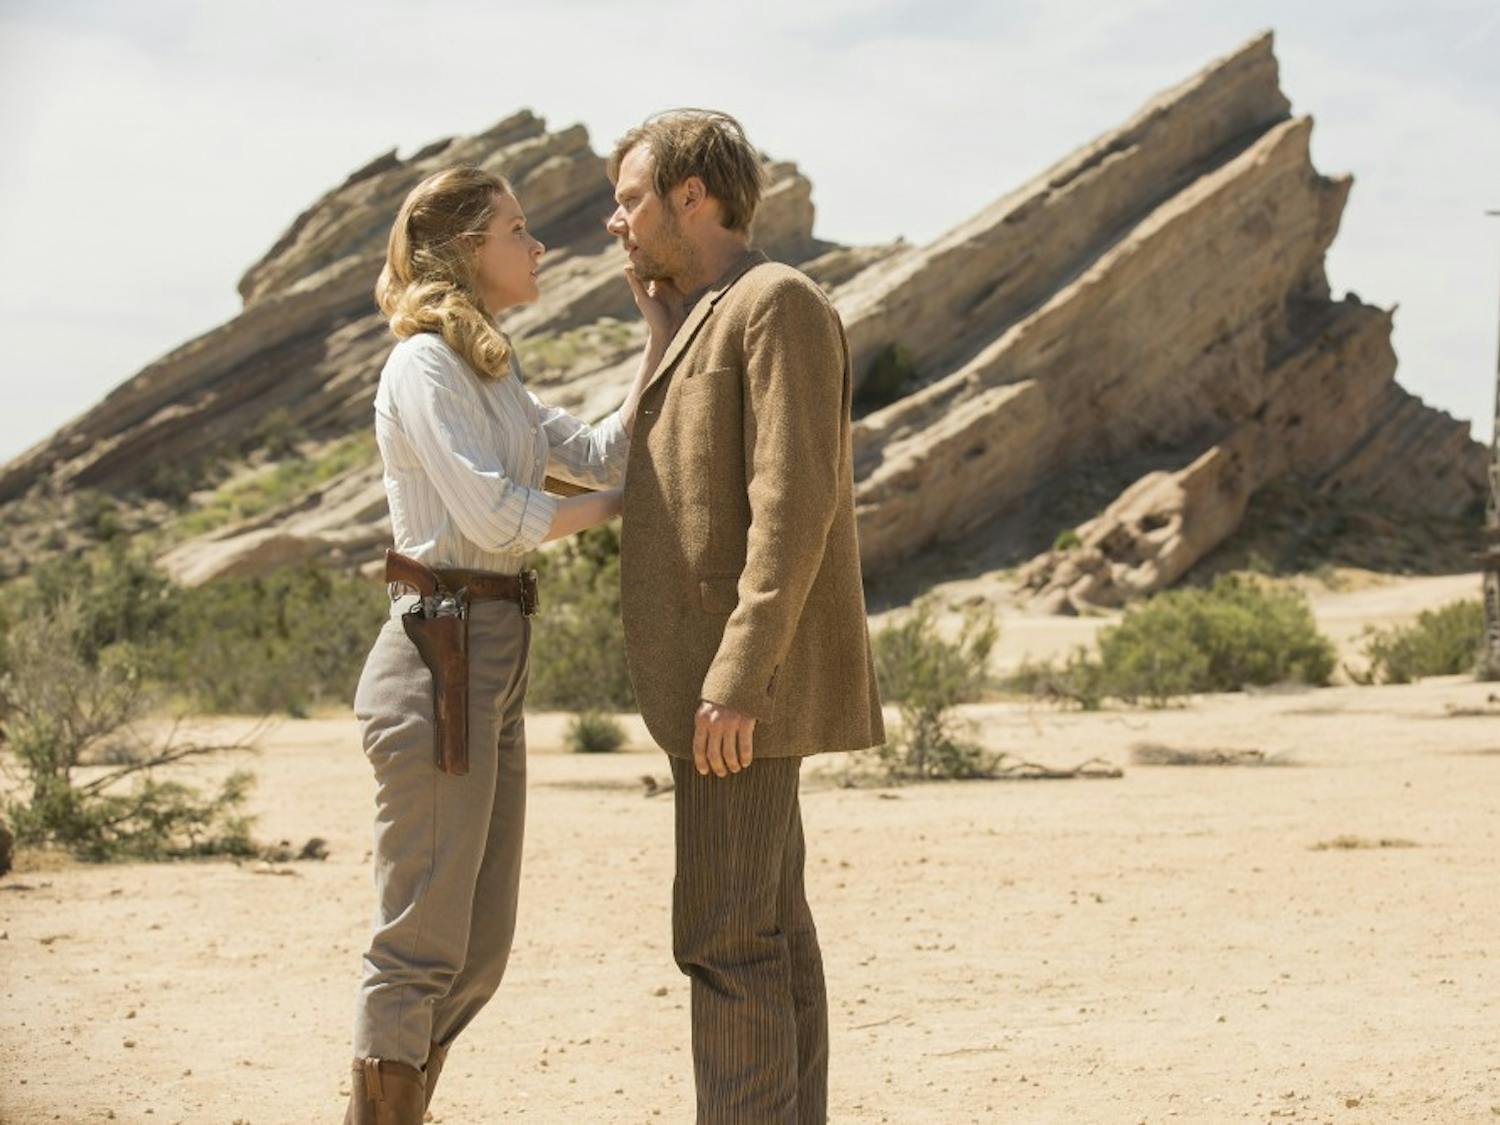 Evan Rachel Wood and Jimmi Simpson in an episode of HBO's "Westworld." (John P. Johnson/HBO)